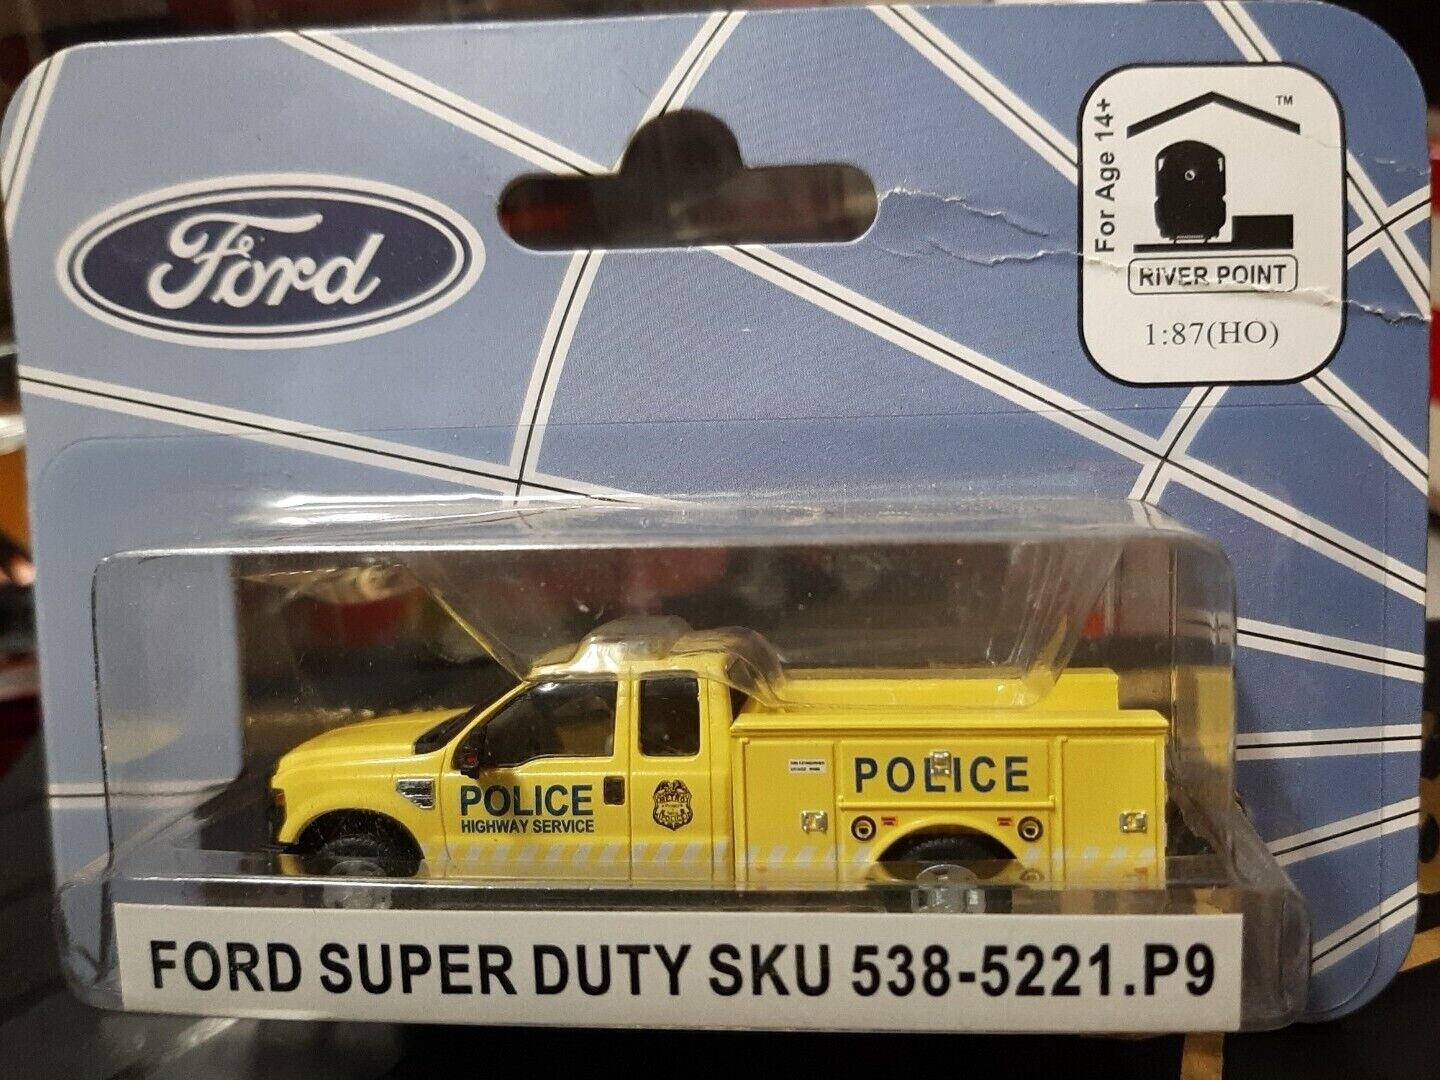 HO RIVER POINT STATION FORD SUPER DUTY #538-5221.P9